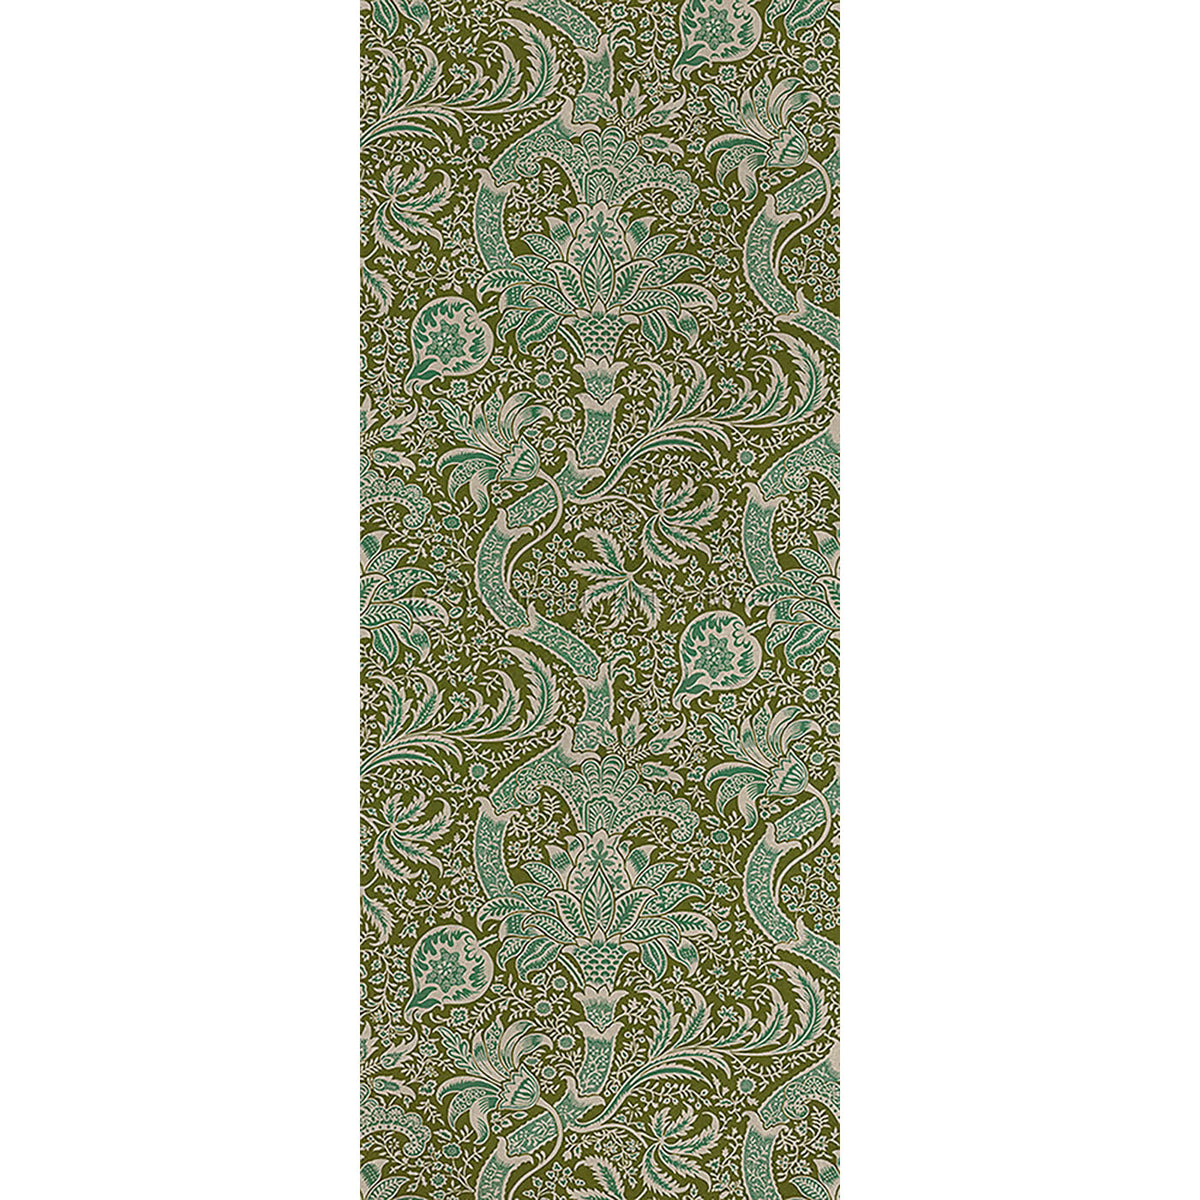 Indian Olive and Teal 36x90